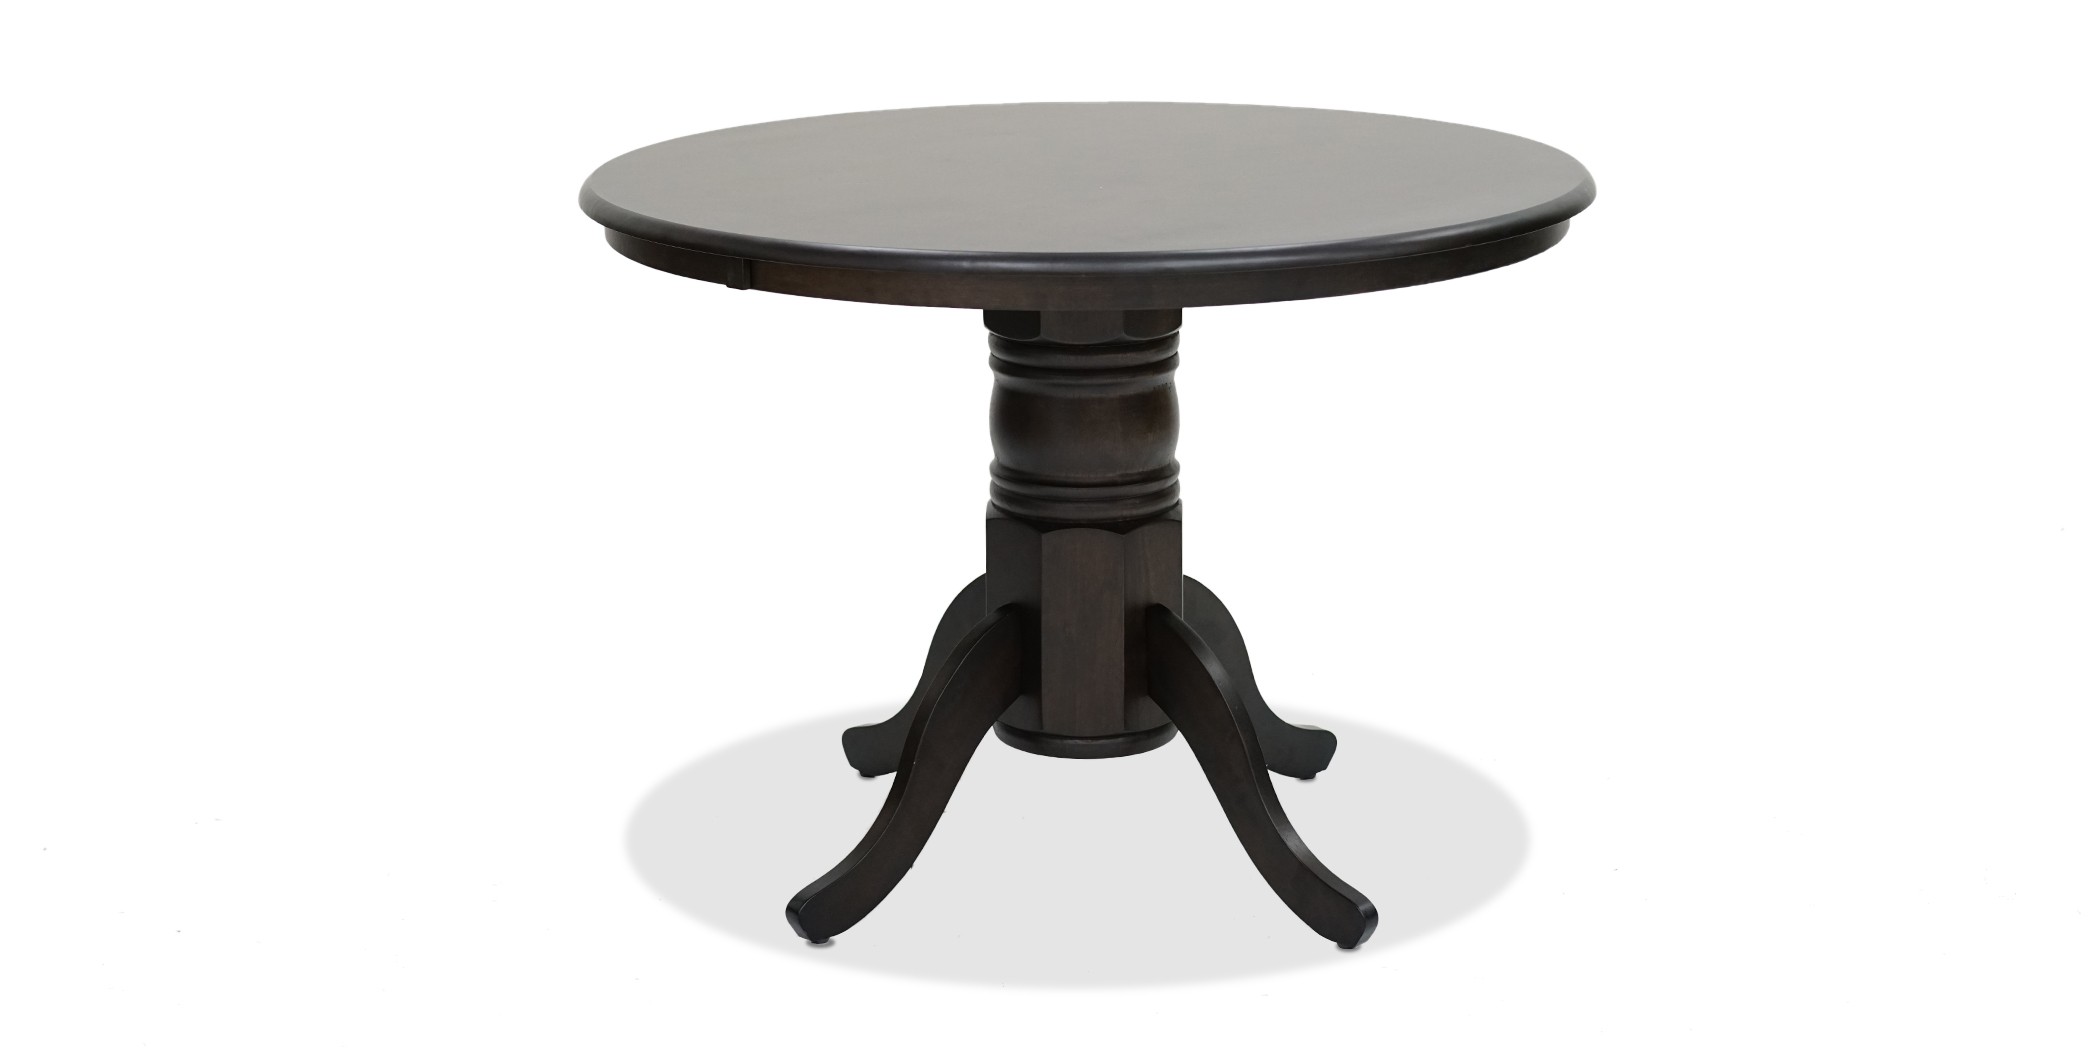 Esther Table Round and 4 Chairs Rubberwood